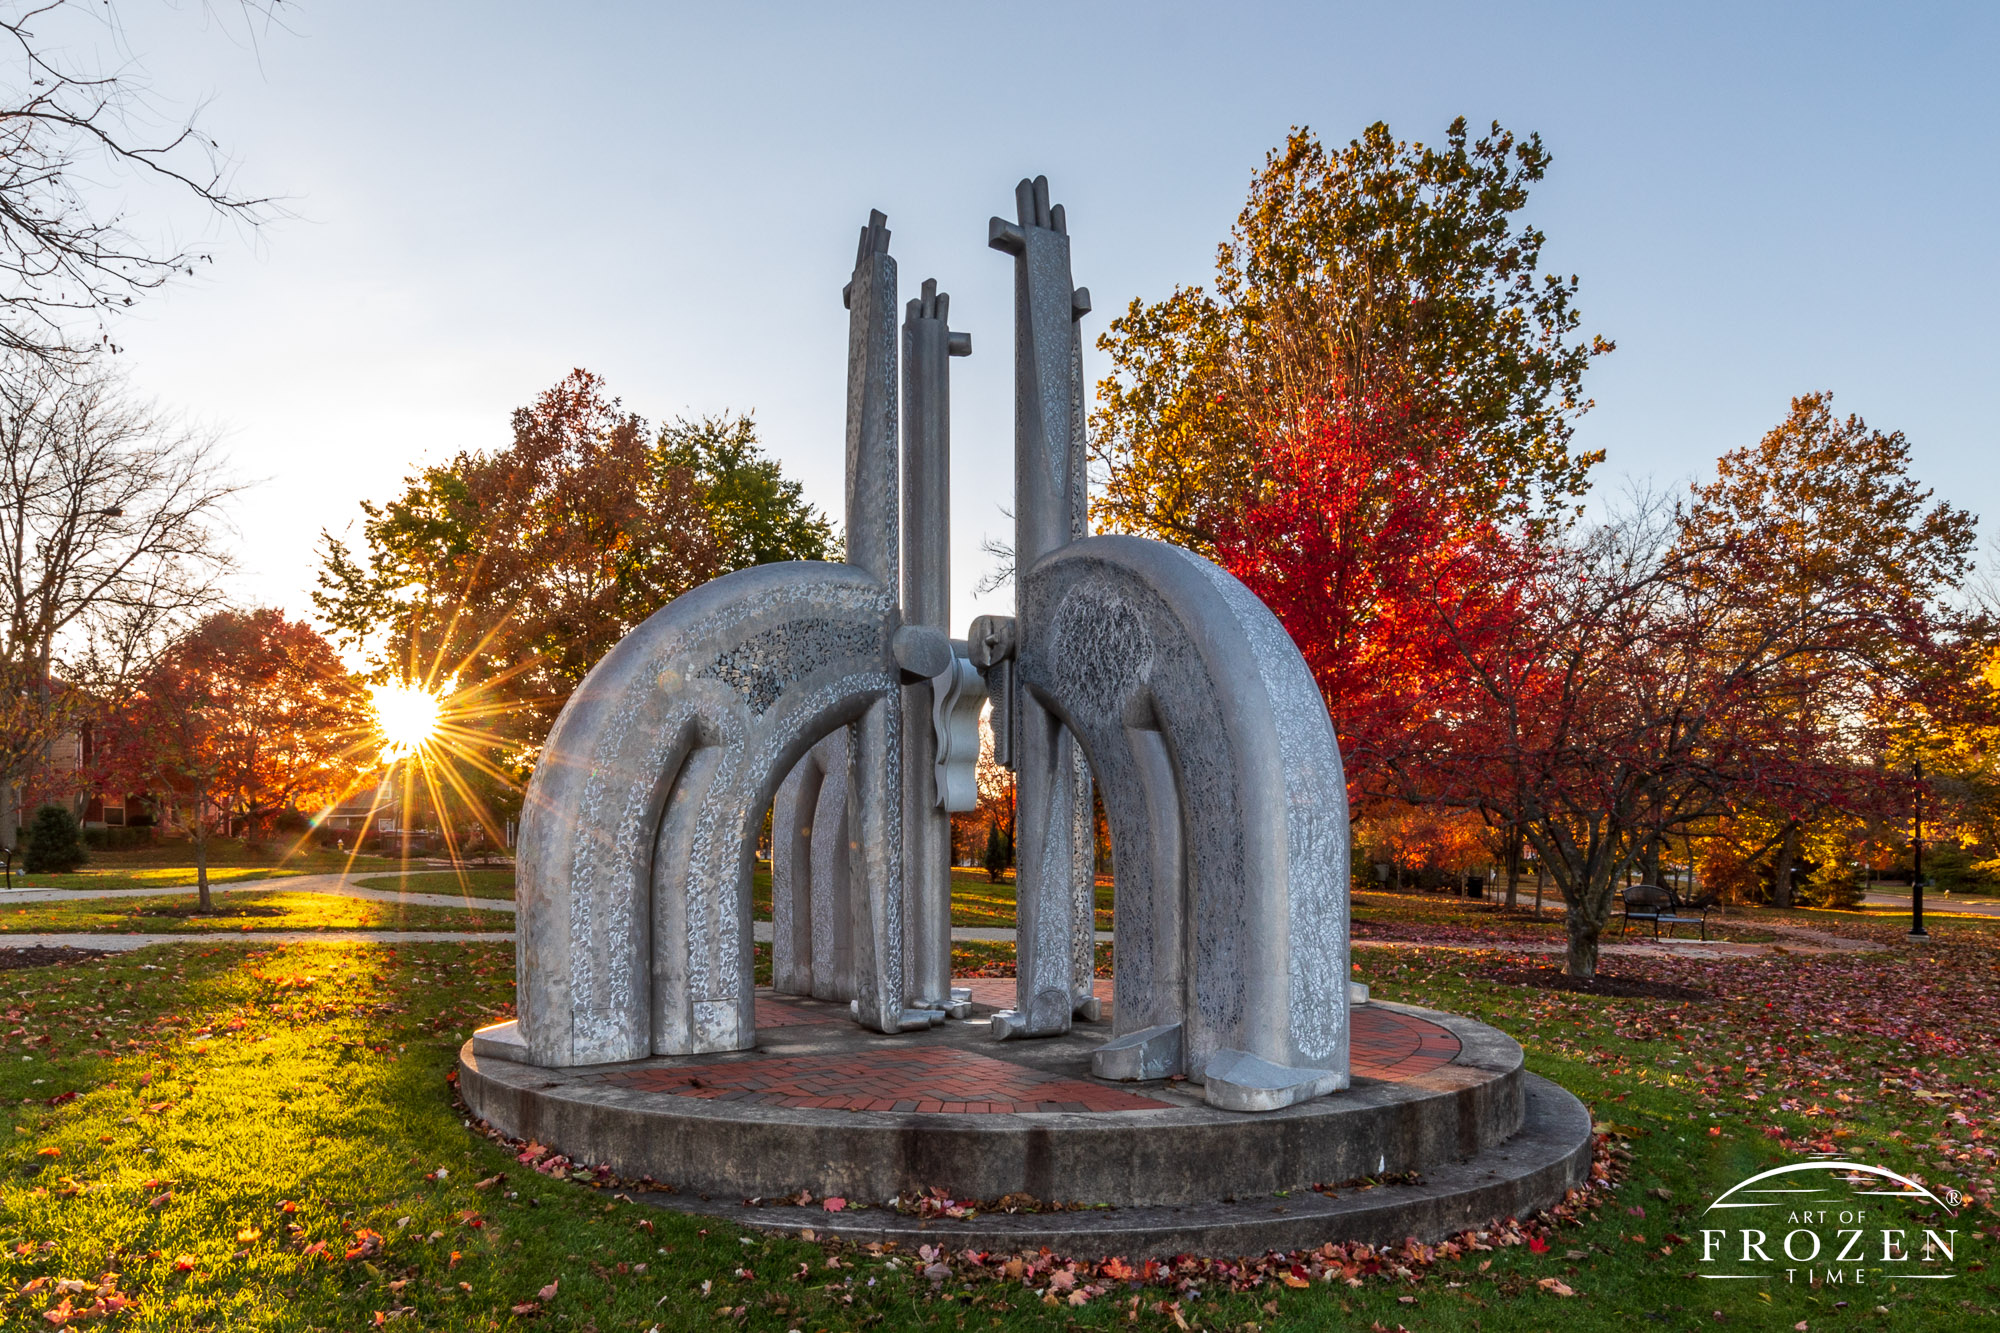 A fanciful aluminum sculpture with stylized figures reaching skyward, surrounded by autumn-colored trees backlit by the setting sun.